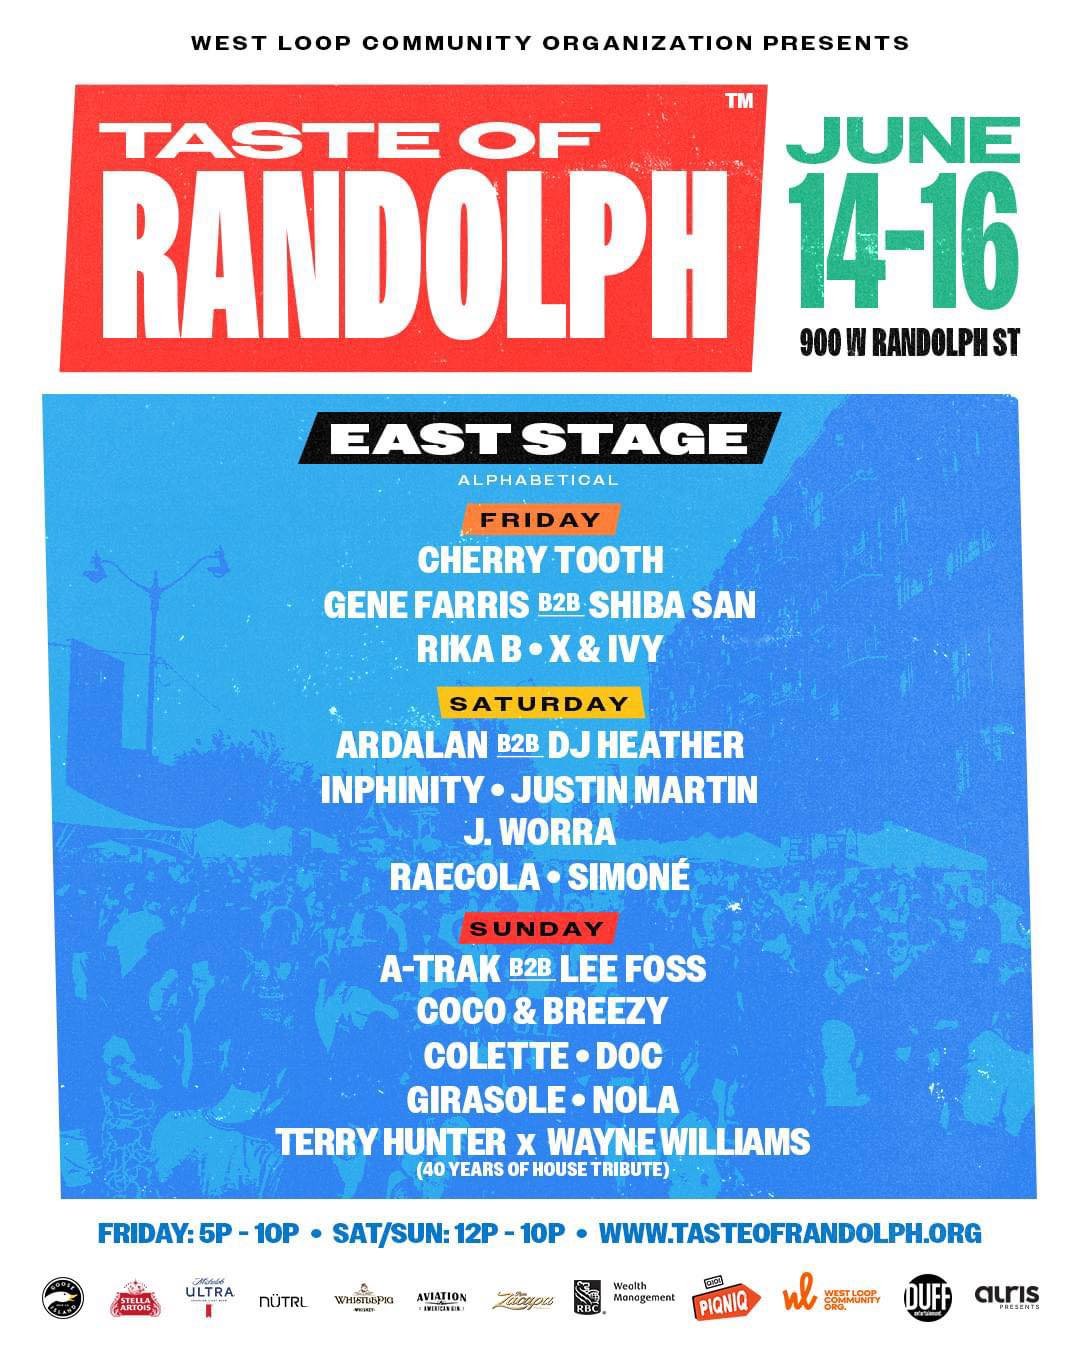 The Taste of Randolph 2024 is only 4 weeks away! Experience the party of the summer in Chicago! ☀️ 

Check out the East Stage lineup below featuring Ardalan b2b DjHeather, A-Trak b2b Lee Foss, Gene Farris b2b Shiba San, Justin Martin , J. Worra, Coco